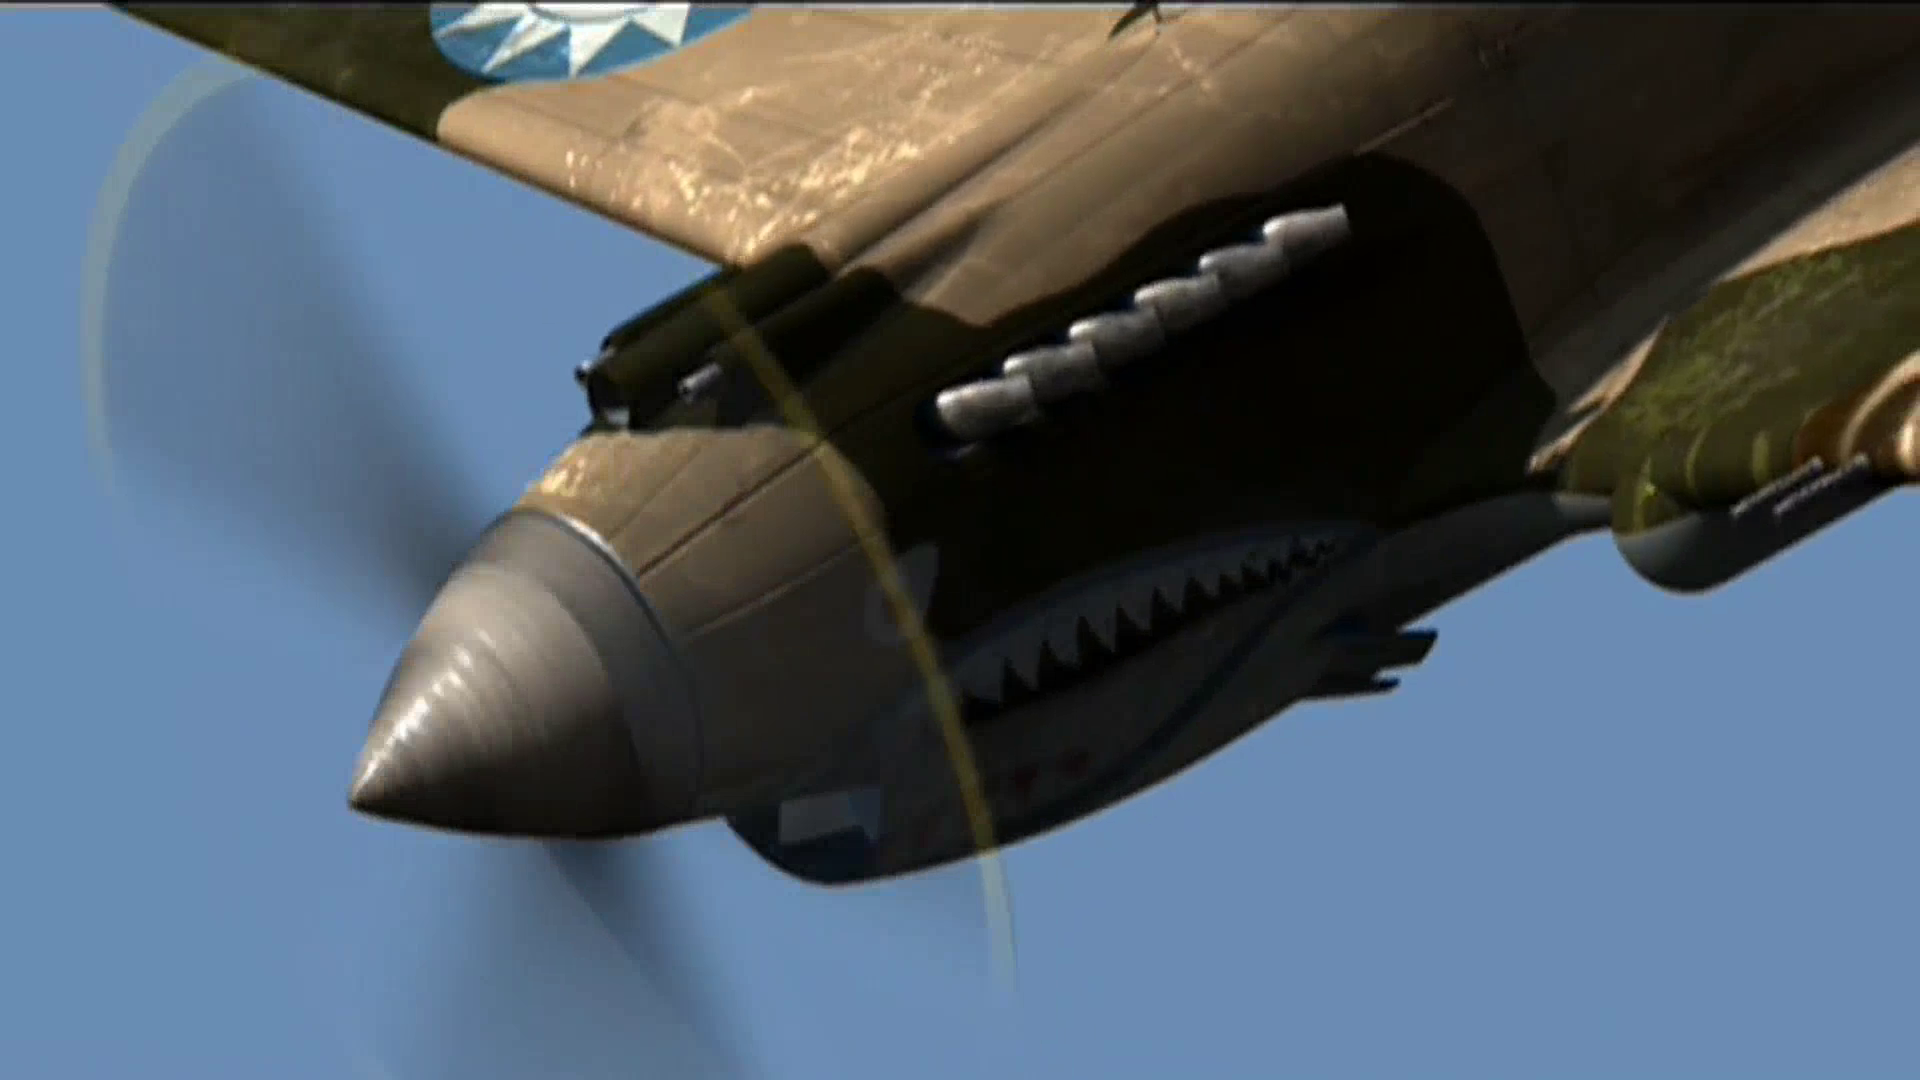 Dogfights S01E03 Flying Tigers 1080p M4V AAC DVDrip 1 04GB